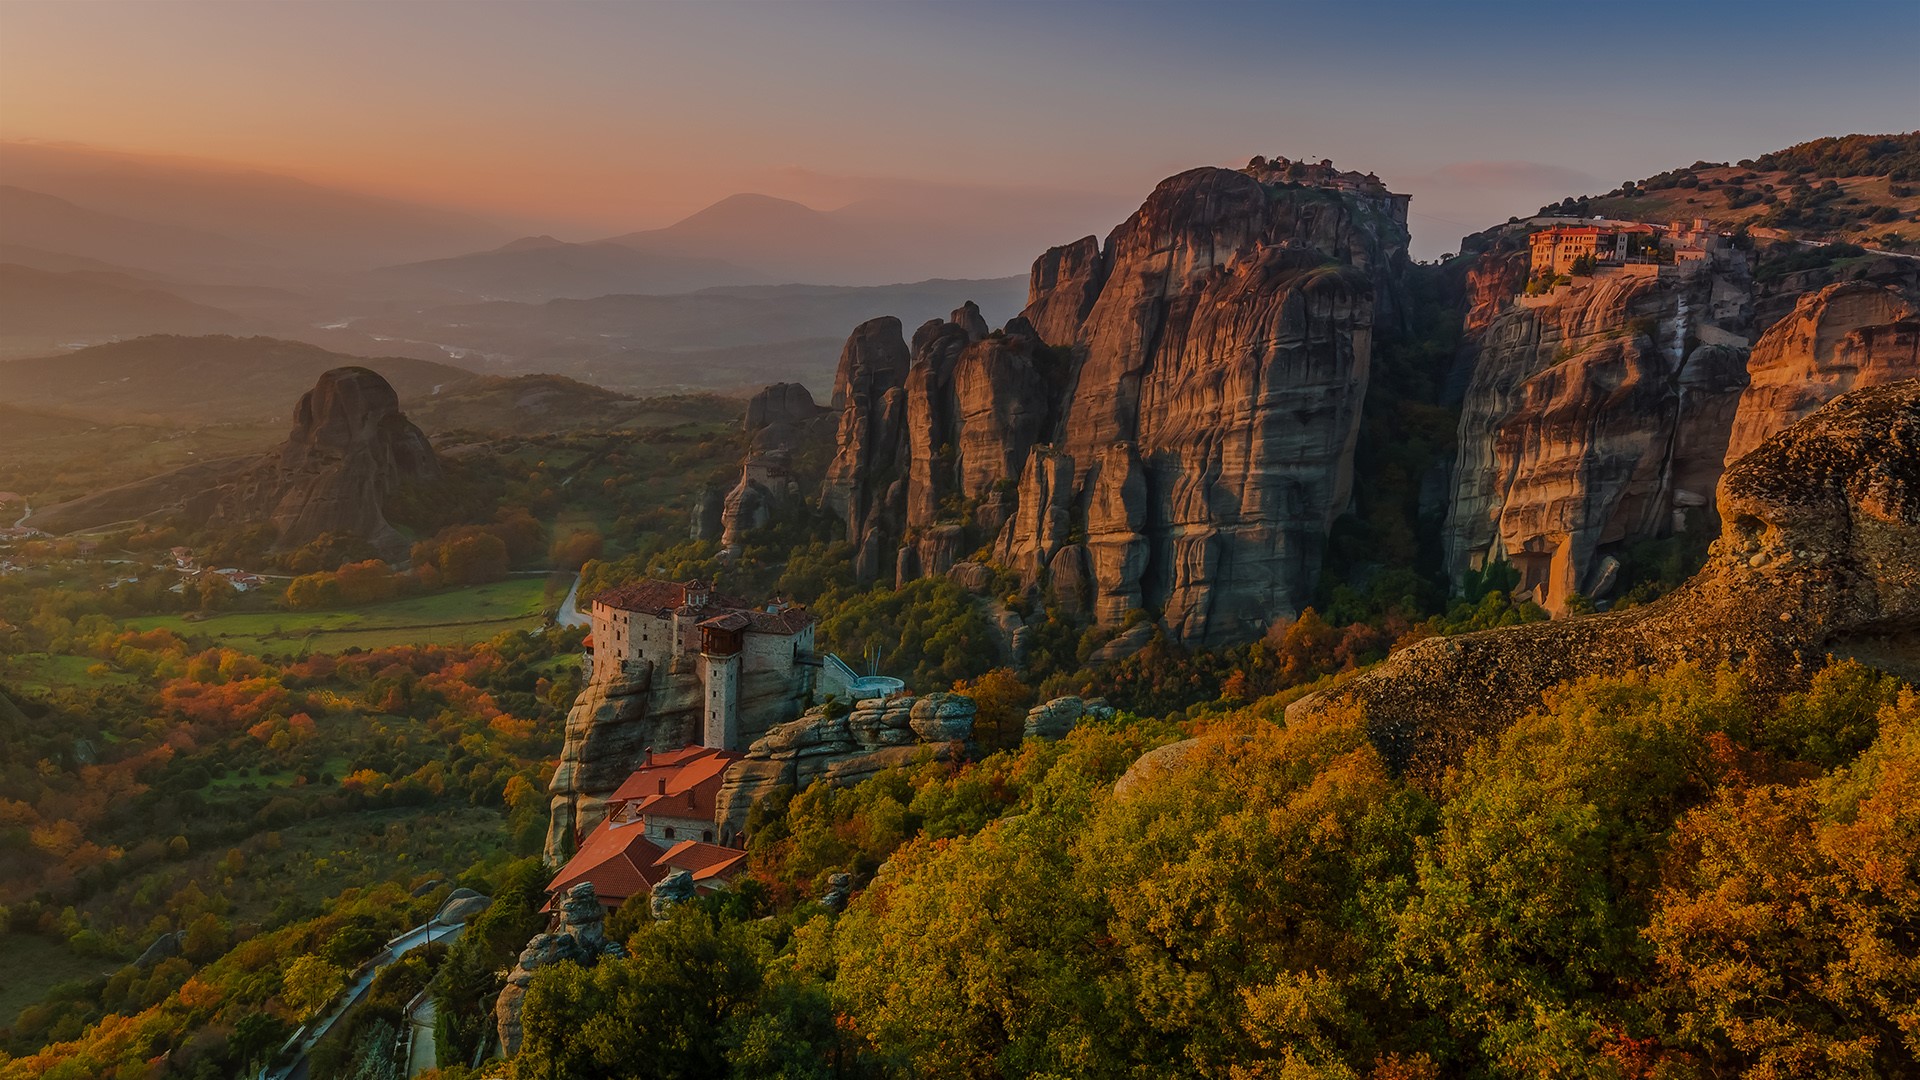 General 1920x1080 nature landscape mountains sky clouds rocks trees forest mist plants house village stairs valley monastery Greece Kalampaka Meteora